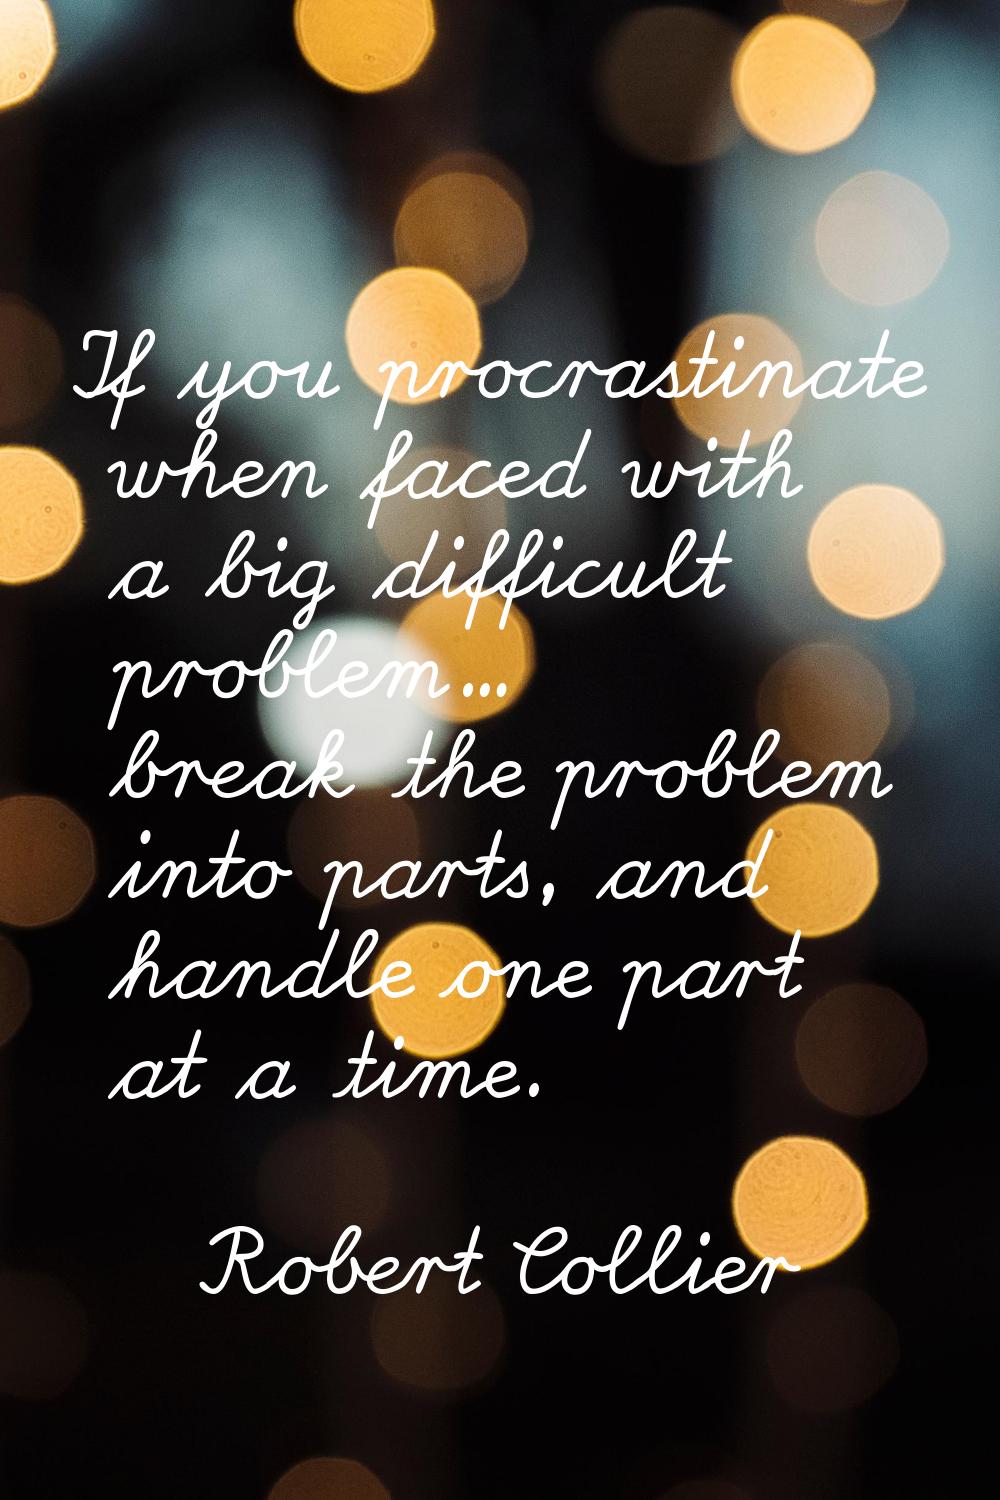 If you procrastinate when faced with a big difficult problem... break the problem into parts, and h